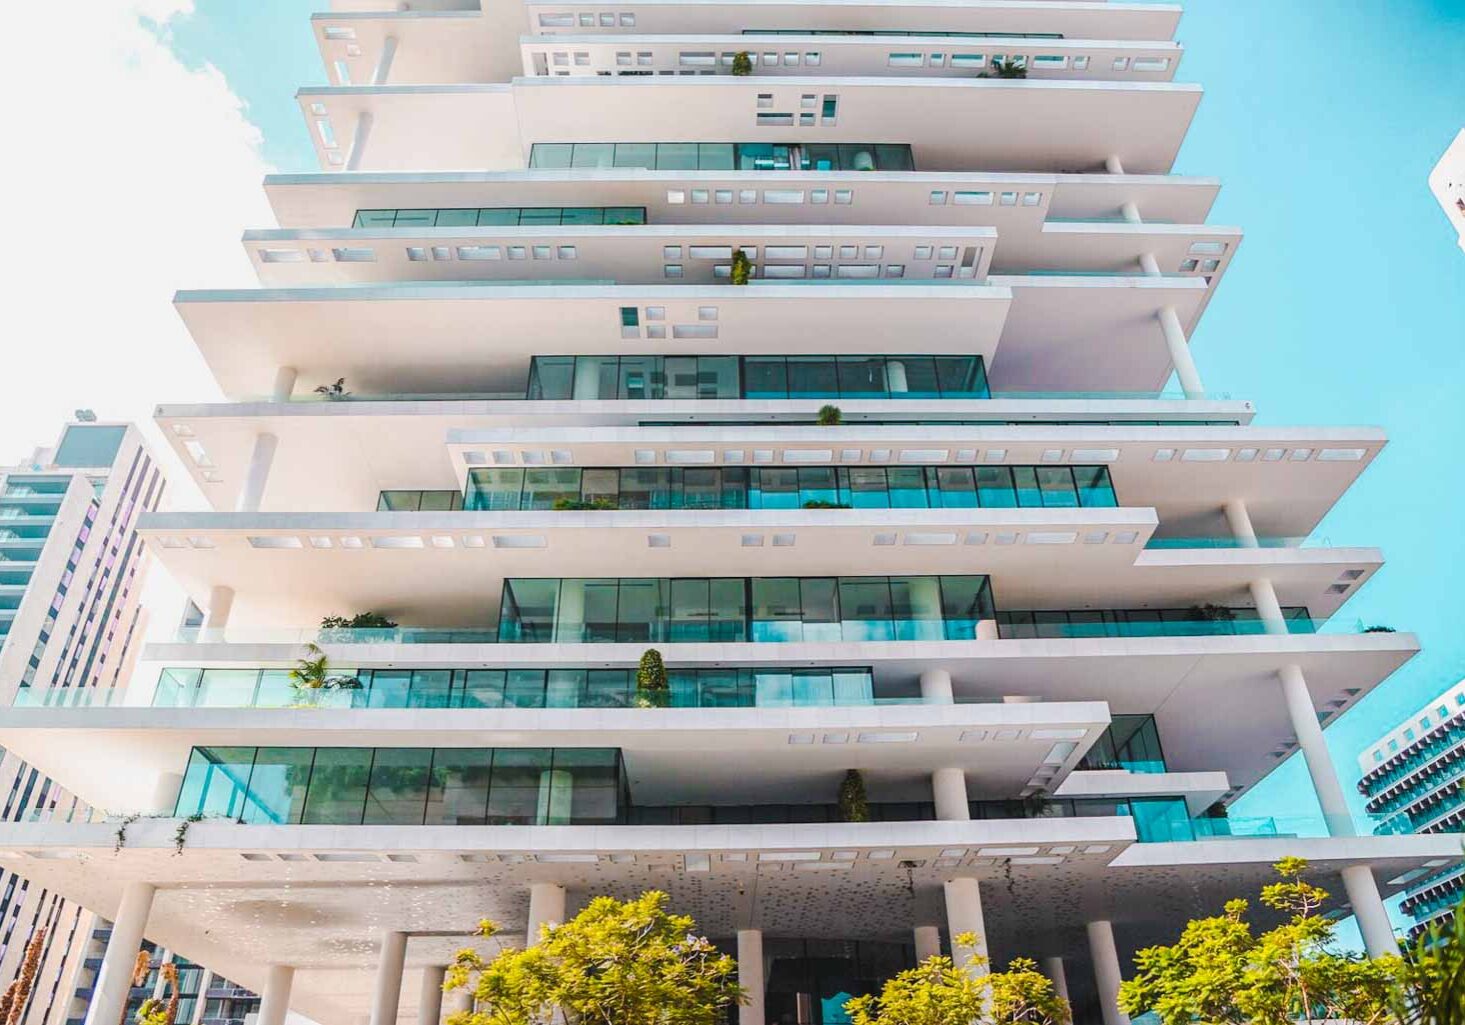 beirut terraces mawad architectural project beirut